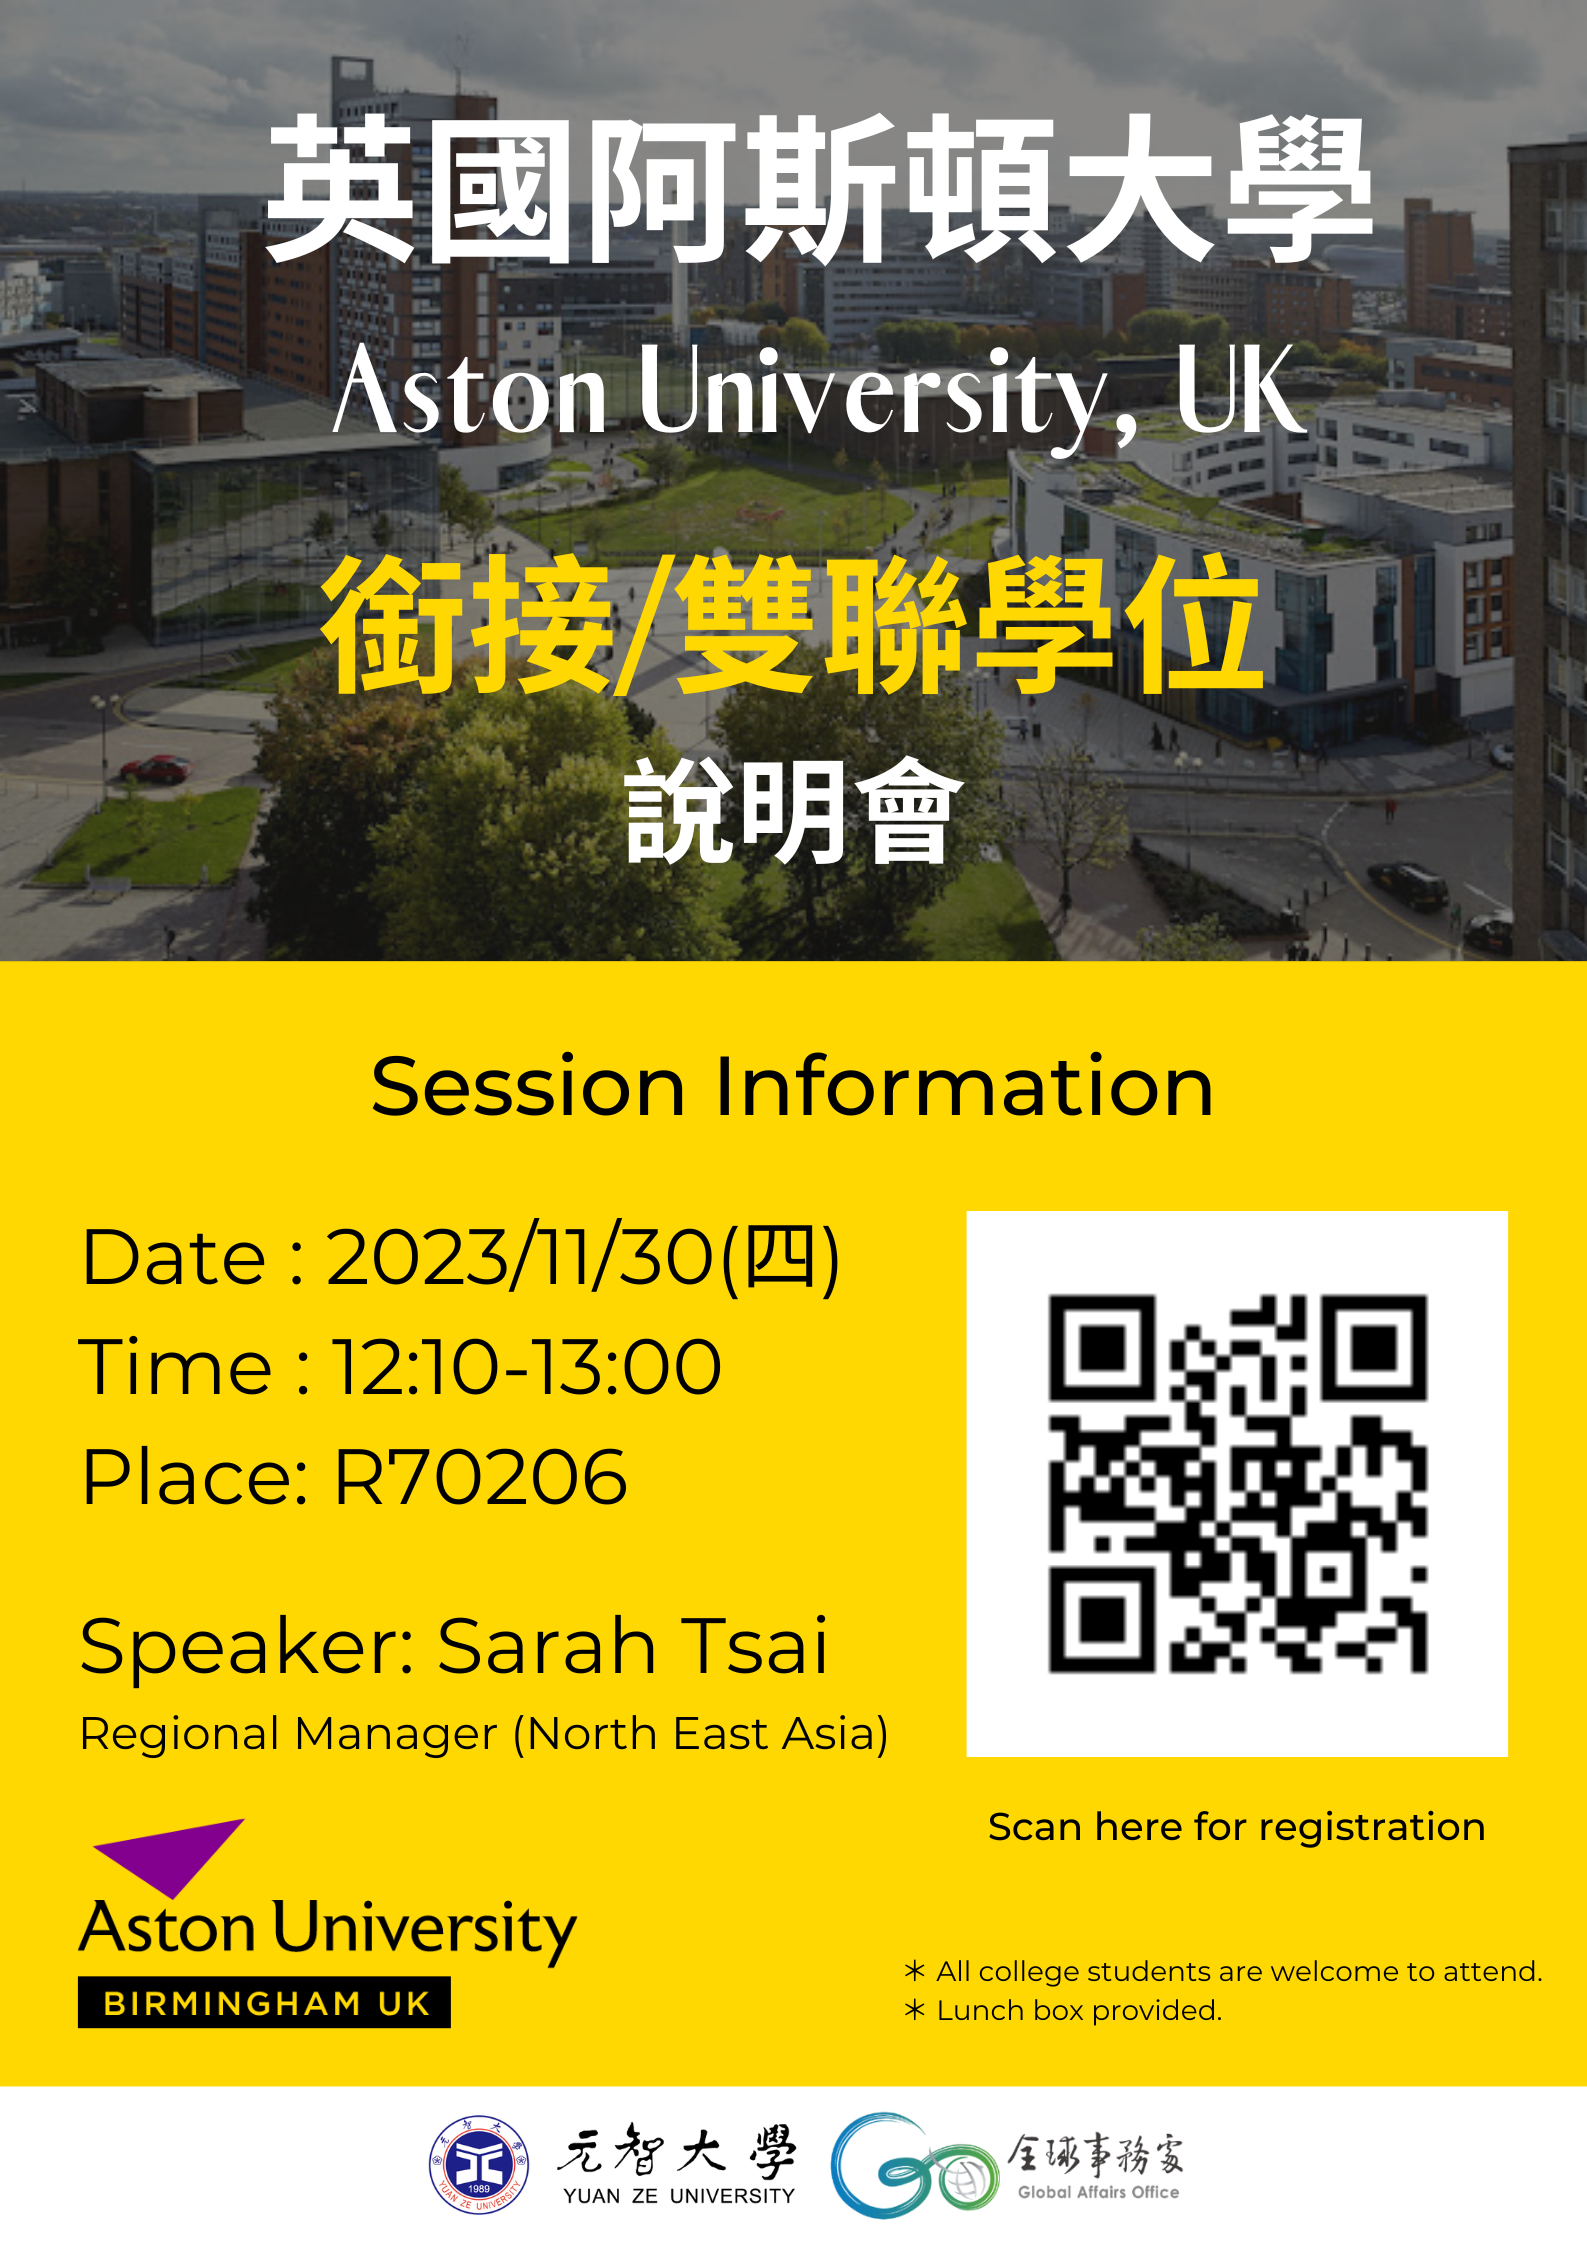 Welcome to attend the study abroad info session with Aston University, UK